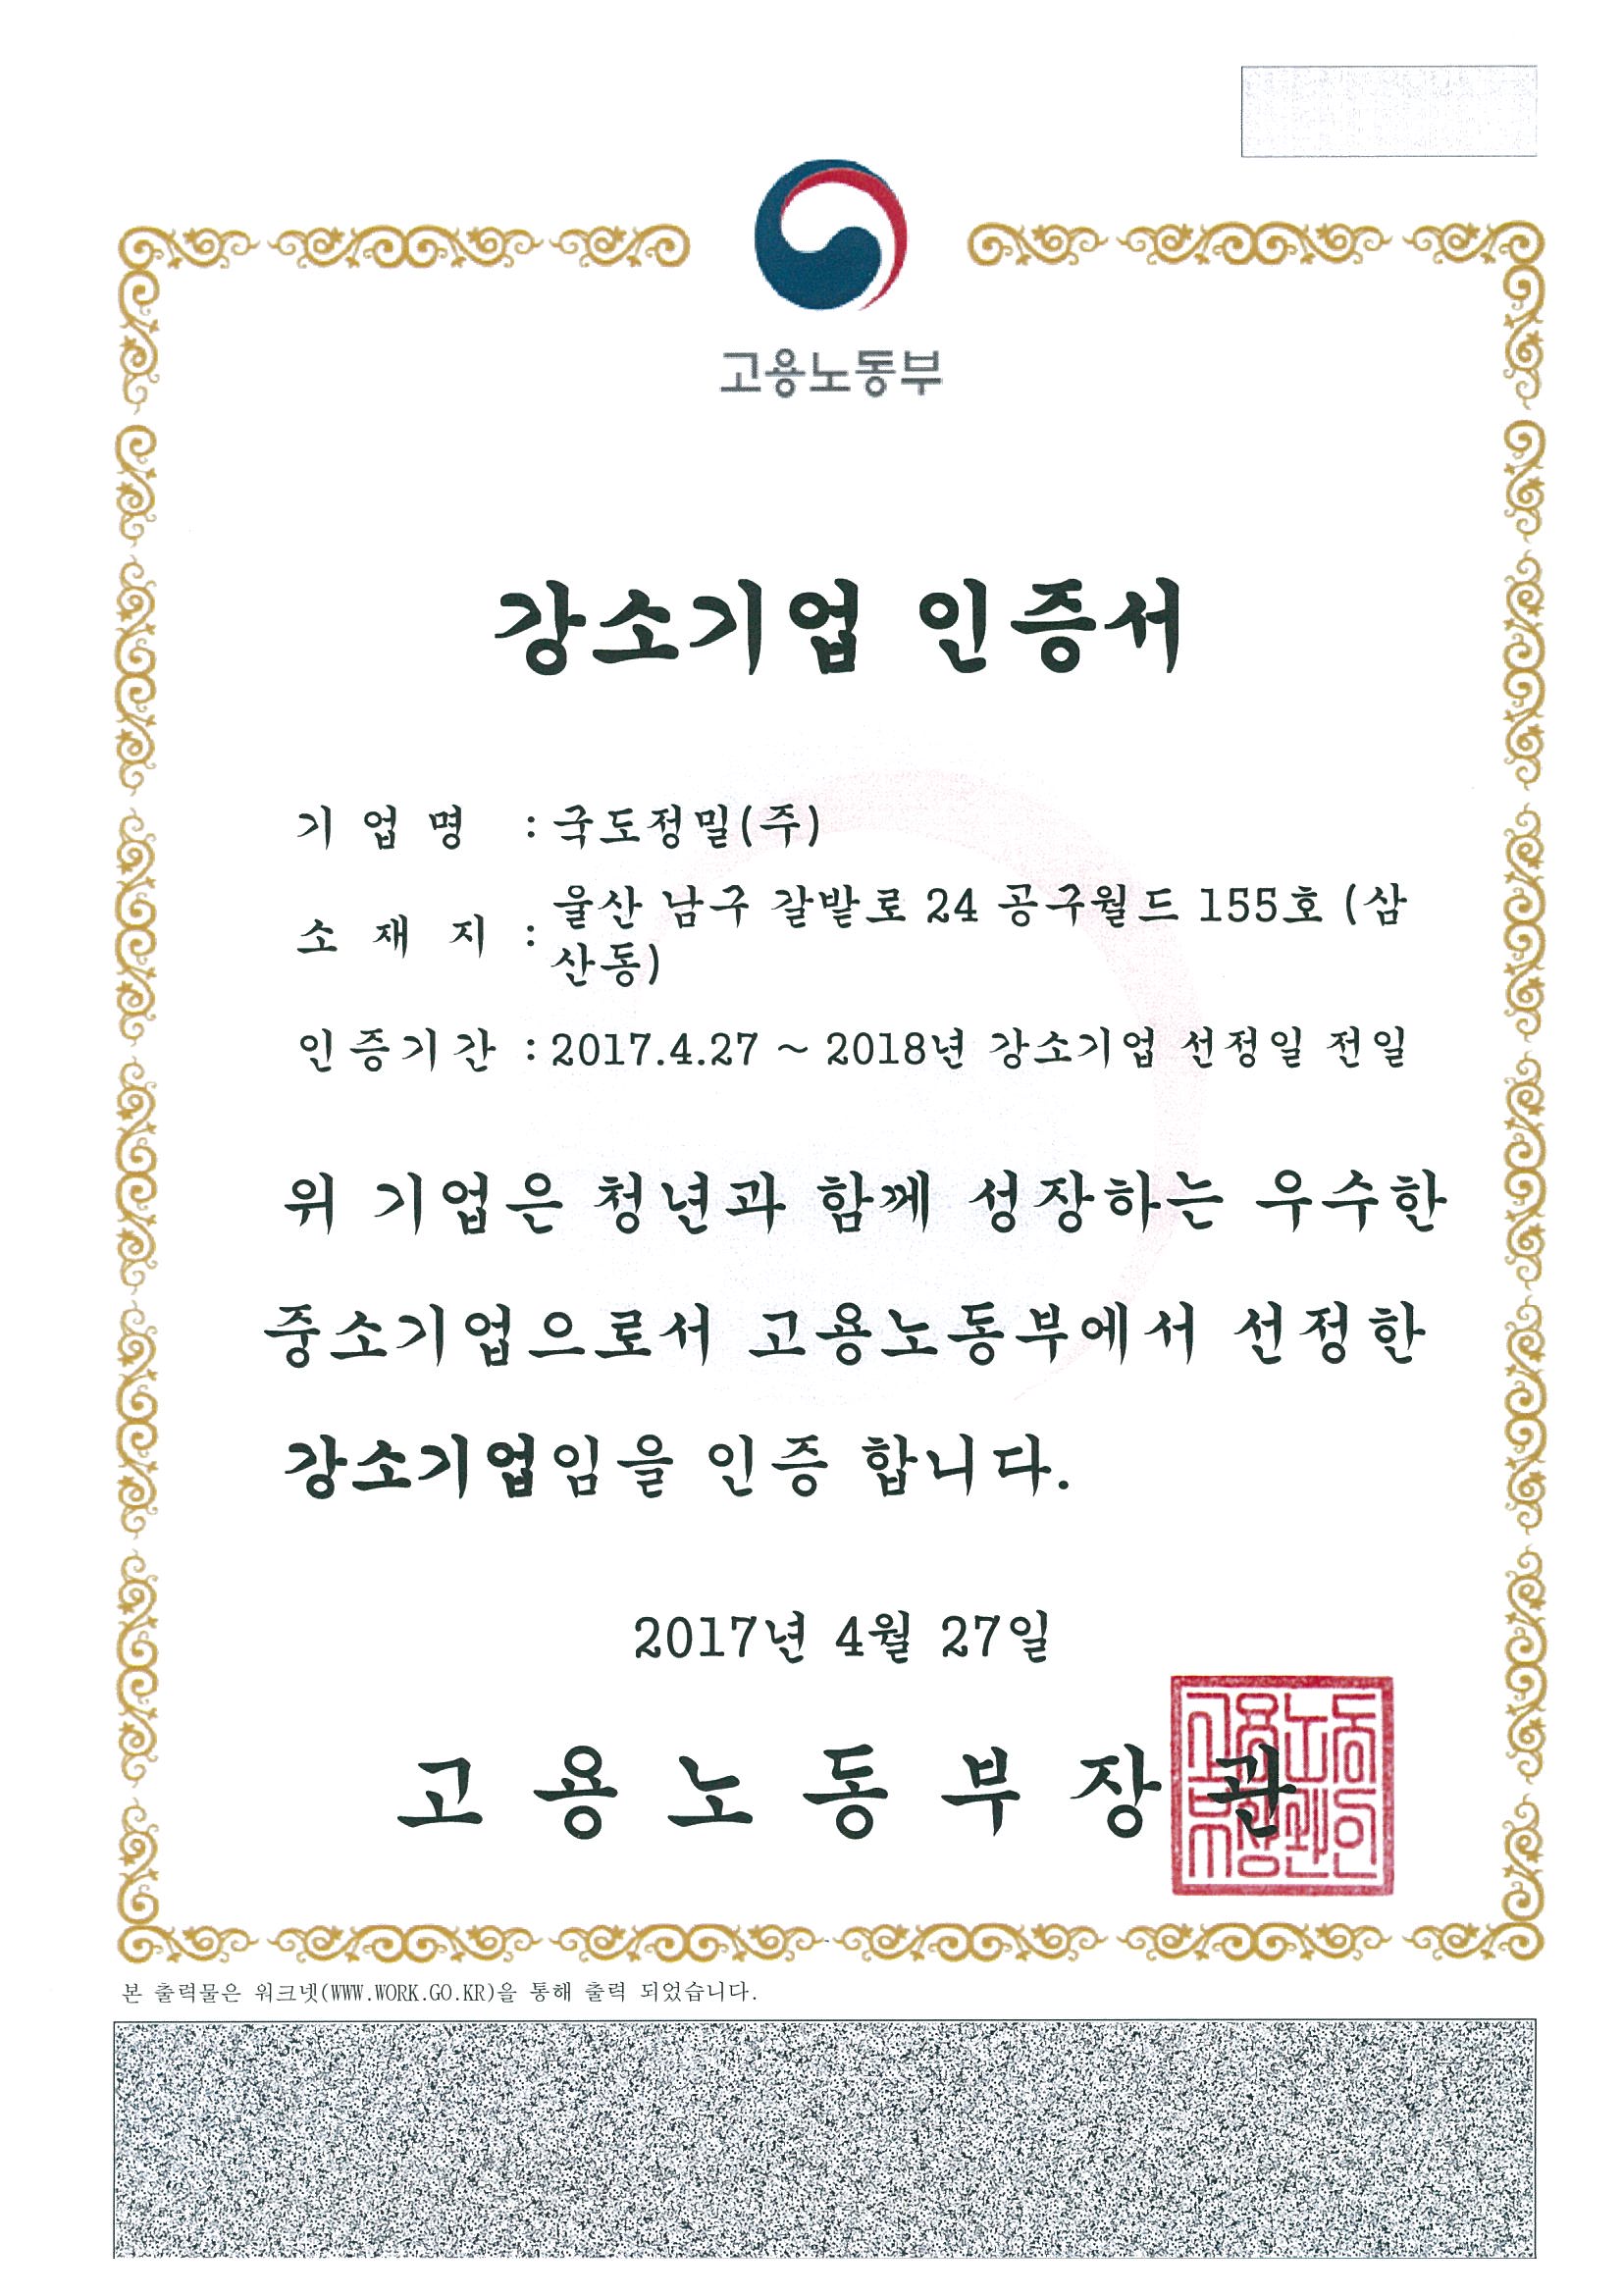 Certificate of Small Giant Enterprise